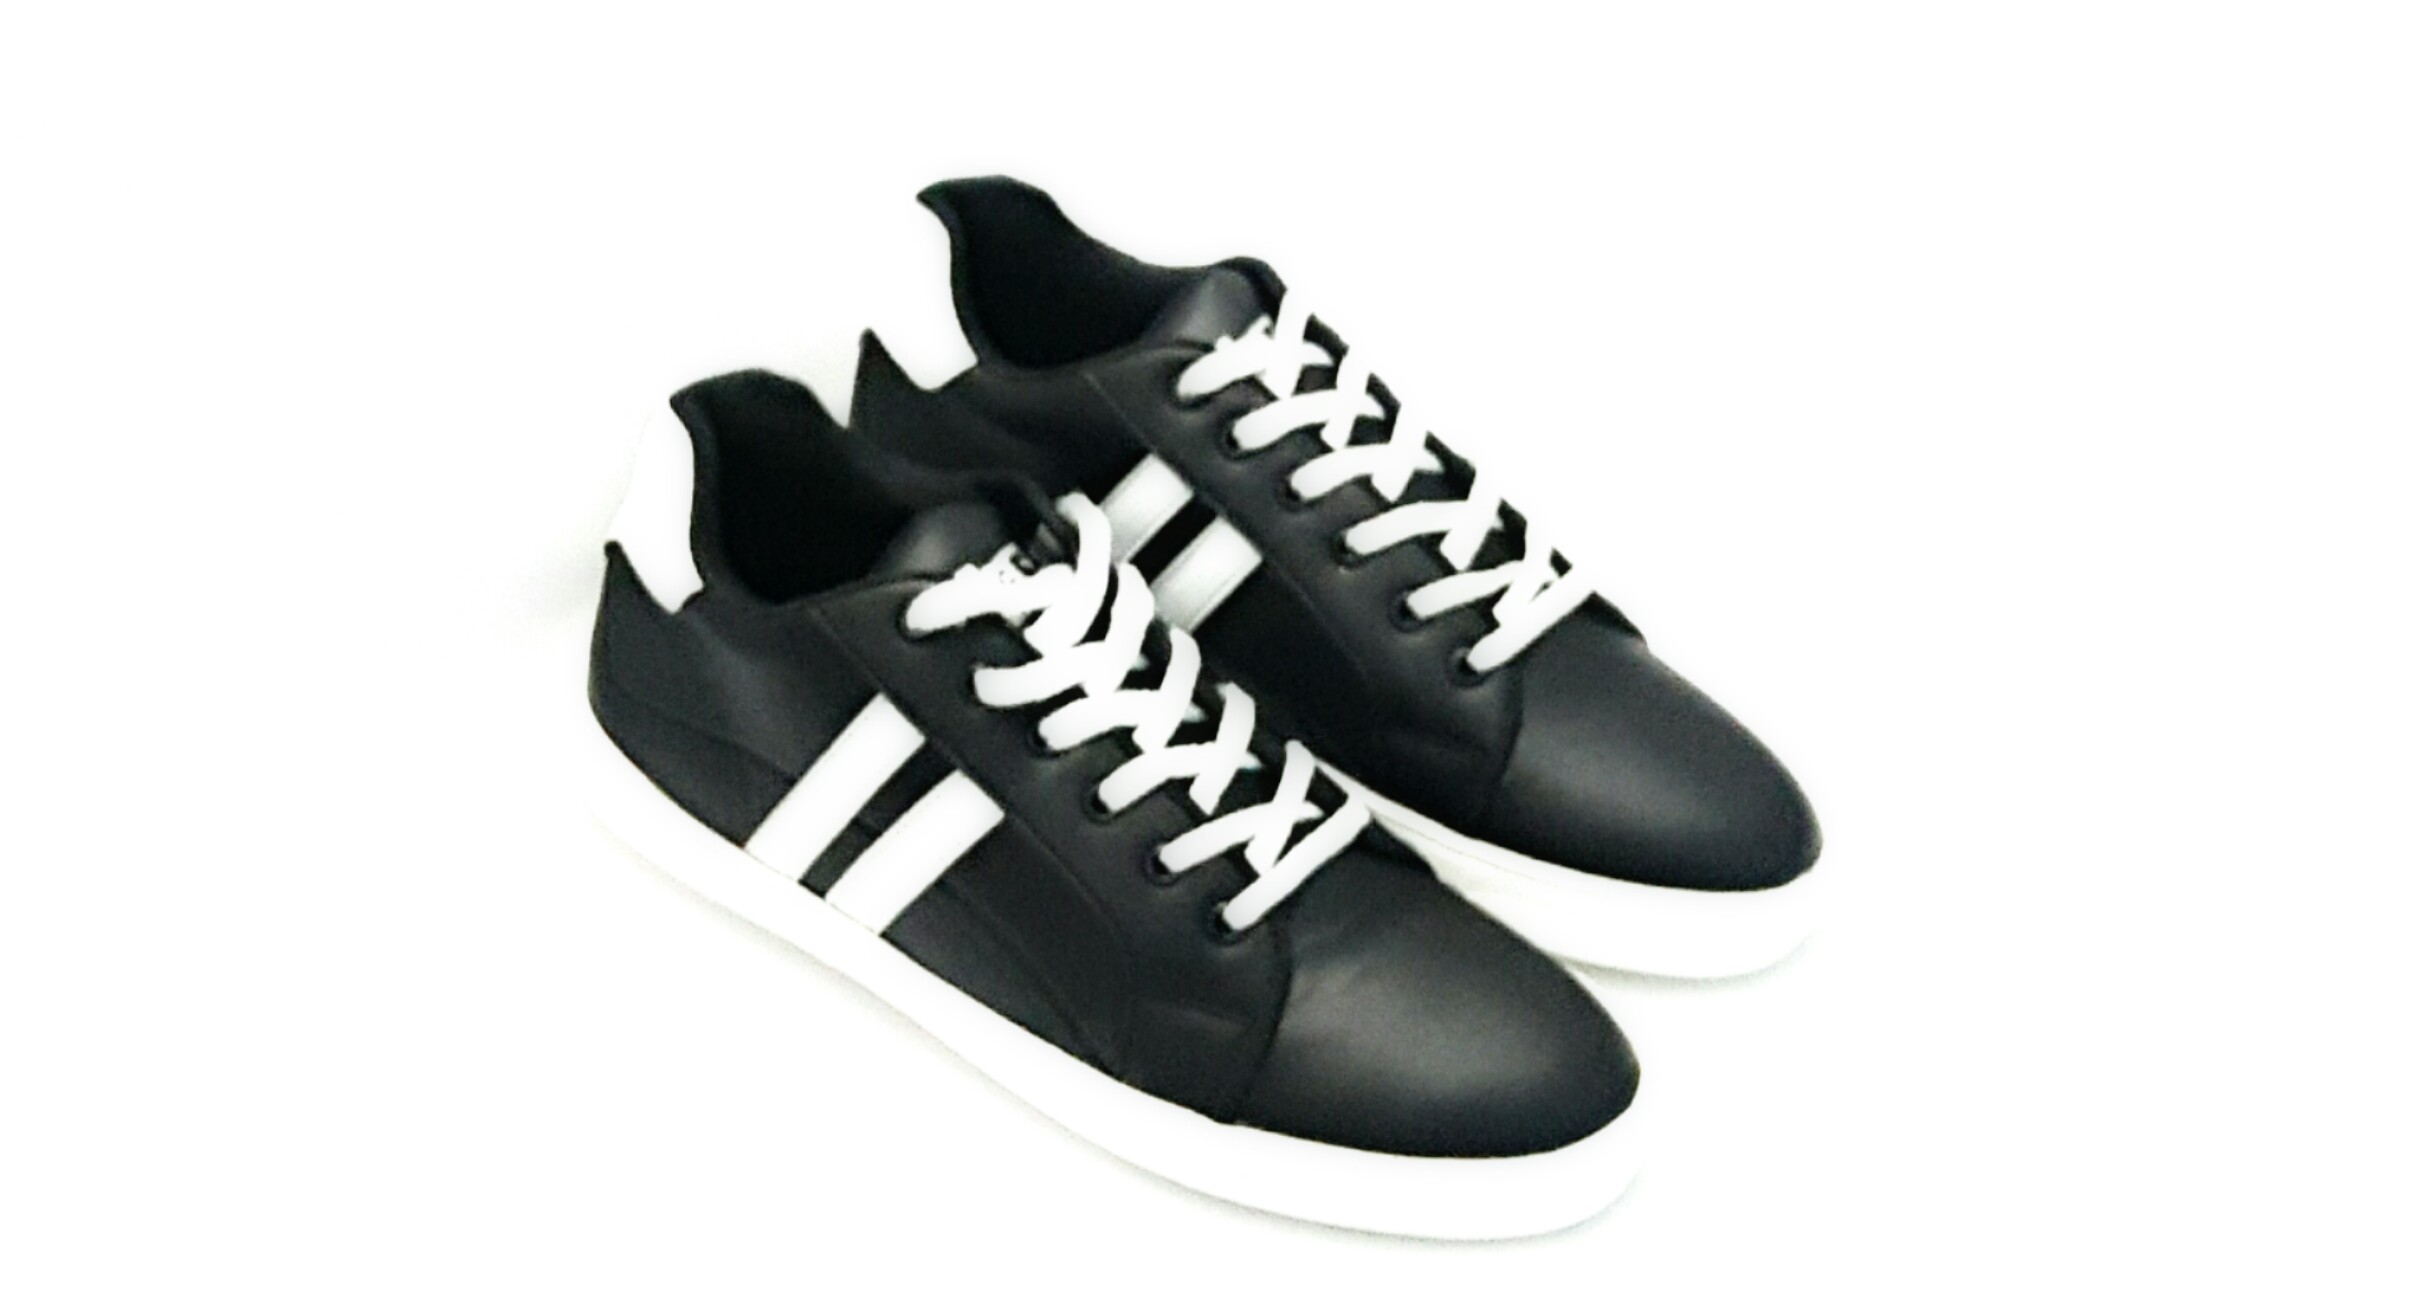 Buy Shoesite Black White Stripe Sneakers Online @ ₹1149 from ShopClues